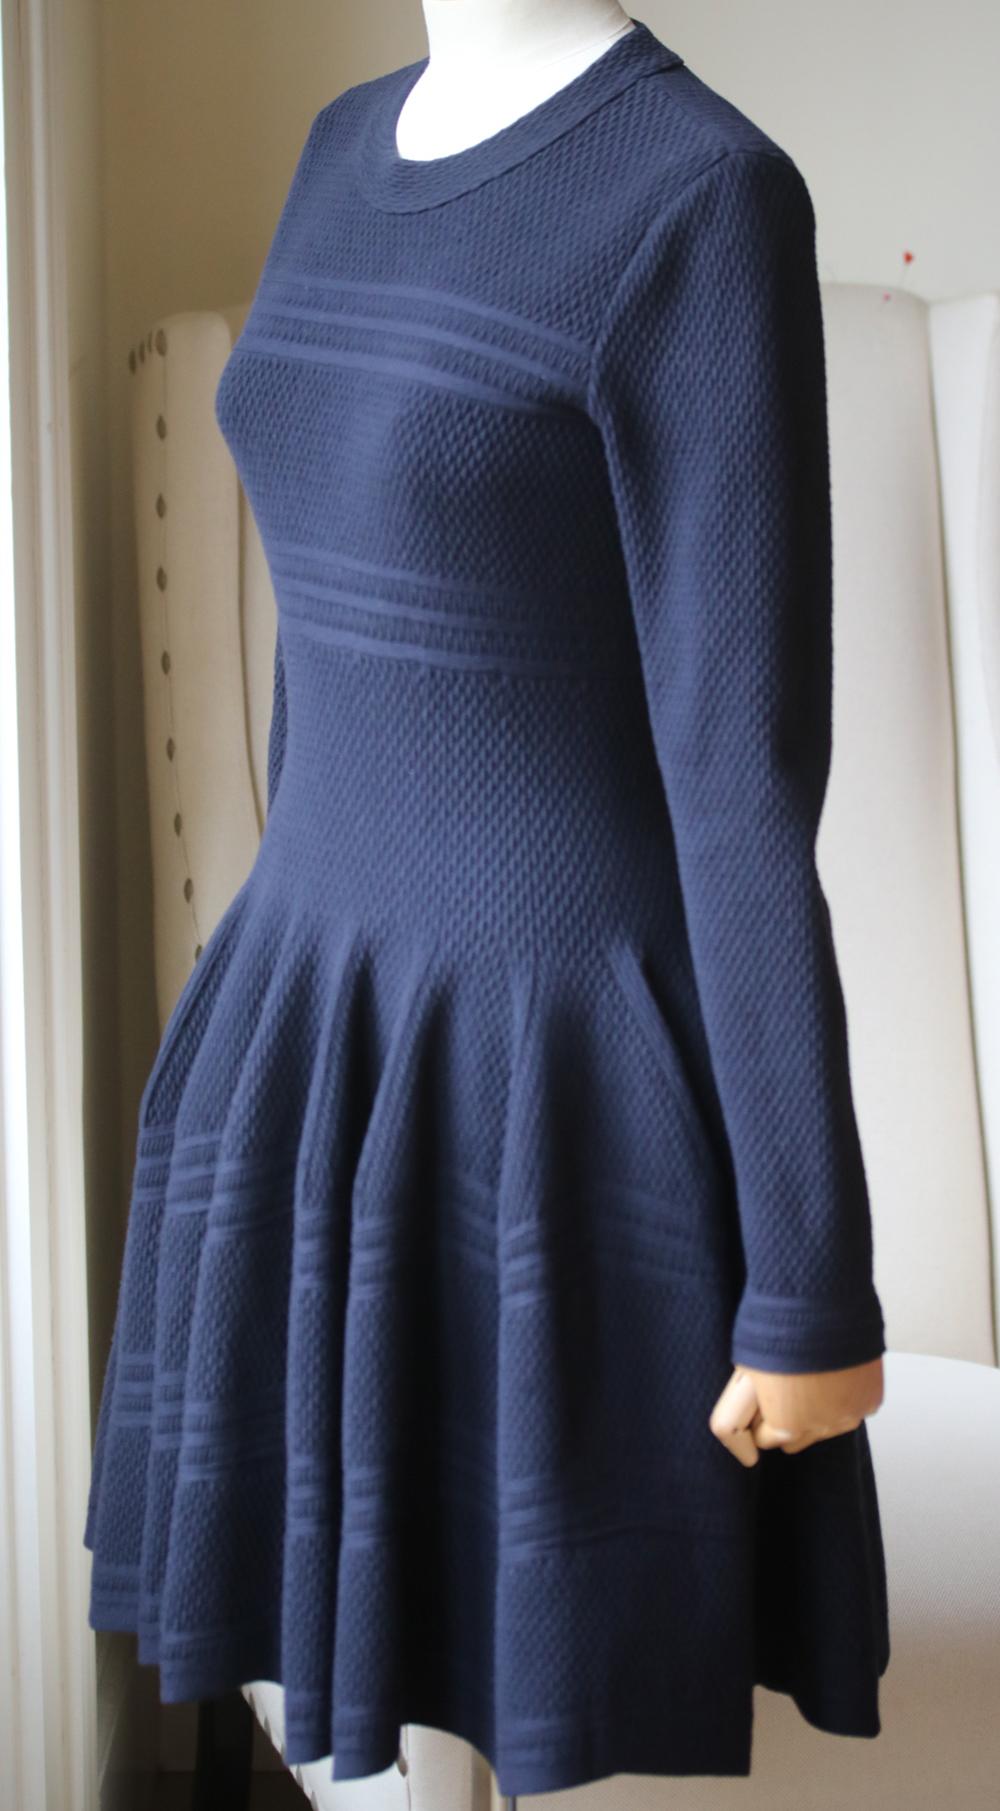 Azzedine Alaïa navy textured stretch-knit wool-blend dress. Features textured wool-blend knit design throughout the top and skirt of the dress. Long-sleeve. Concealed zip down the back. Colour: navy. Made in Italy. 55% Wool, 20% viscose, 16%